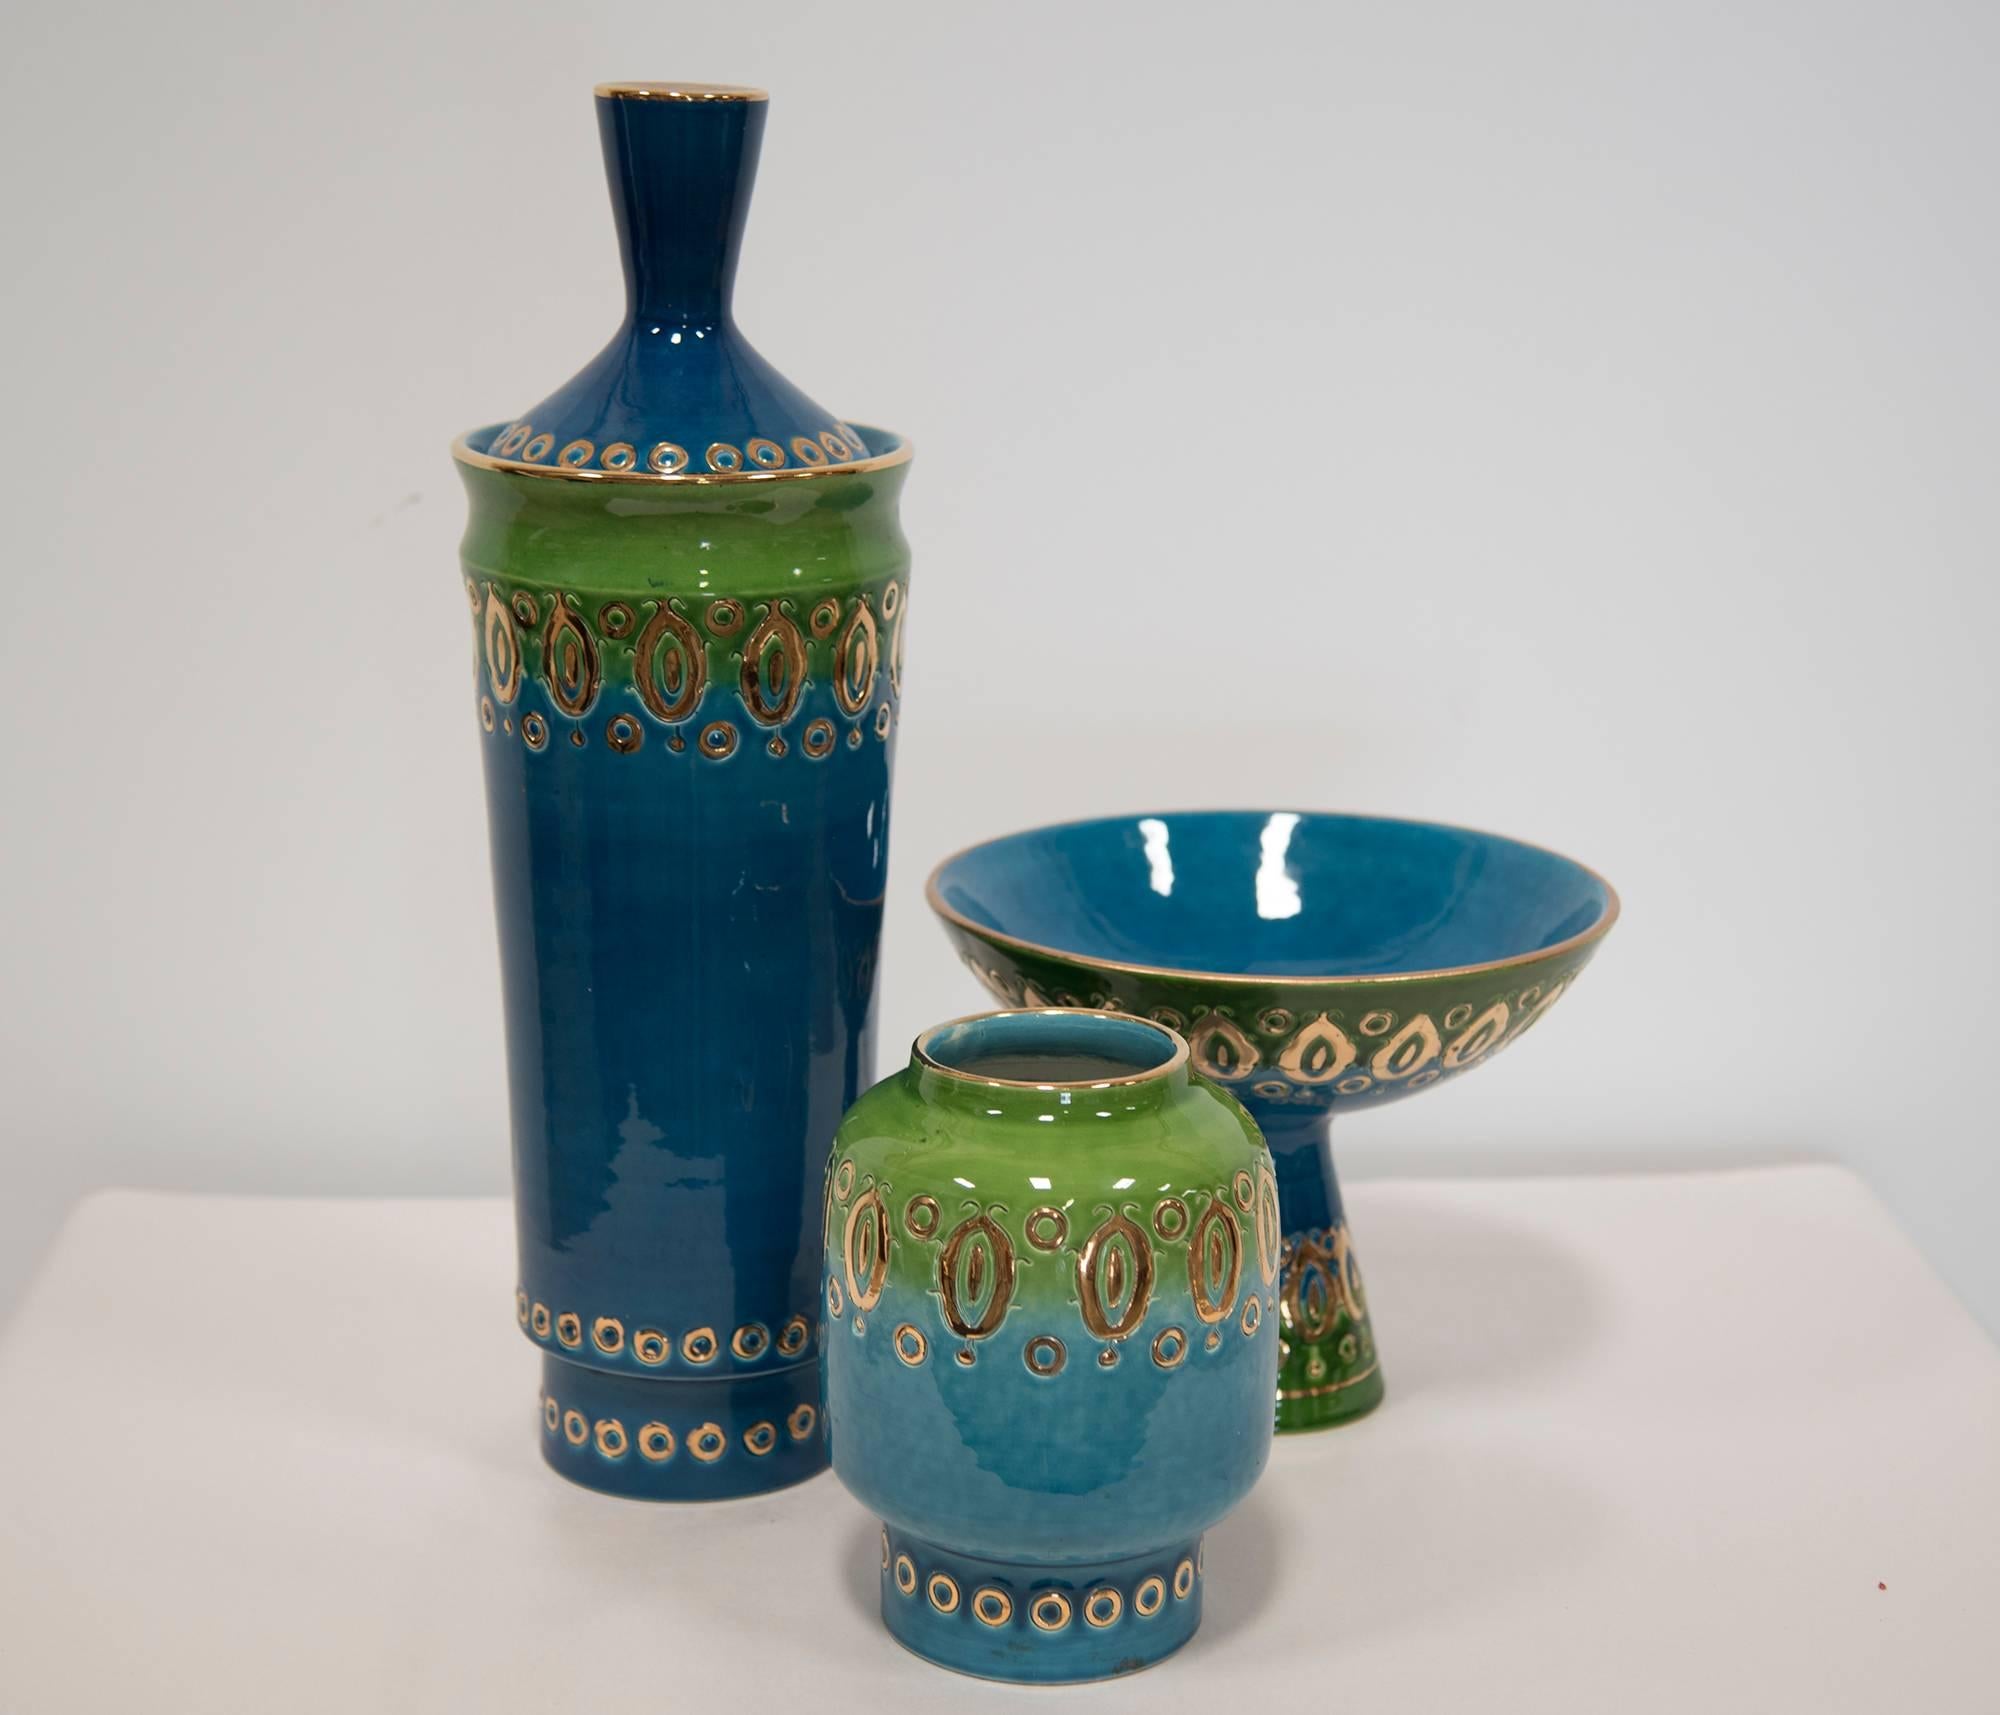 A three-piece colorful ceramic set designed by Bitossi for Rosenthal. Brilliant blue and green colors with gilt adornment, Italian, 1960.